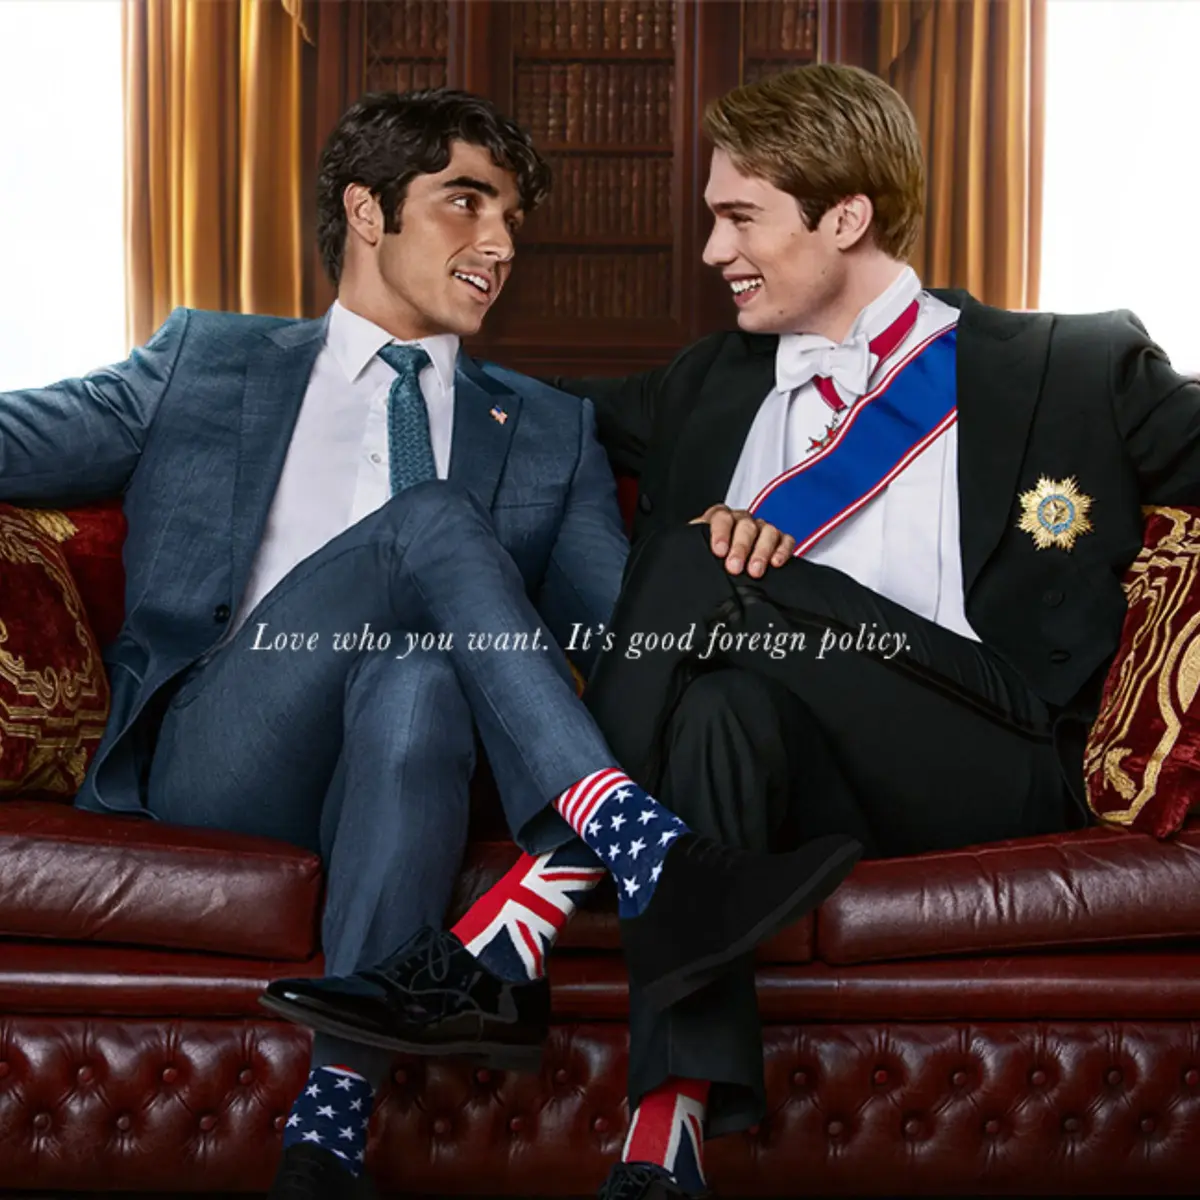 A photograph of a smiling Alex, a Latino man with light brown skin and black hair wearing a gray suit and American flag socks, sitting on a couch with a smiling Henry, a white man with blonde hair, wearing a black suit, blue slash, and Union Jack socks. The photograph reads, "Love who you want. It's good foreign policy."